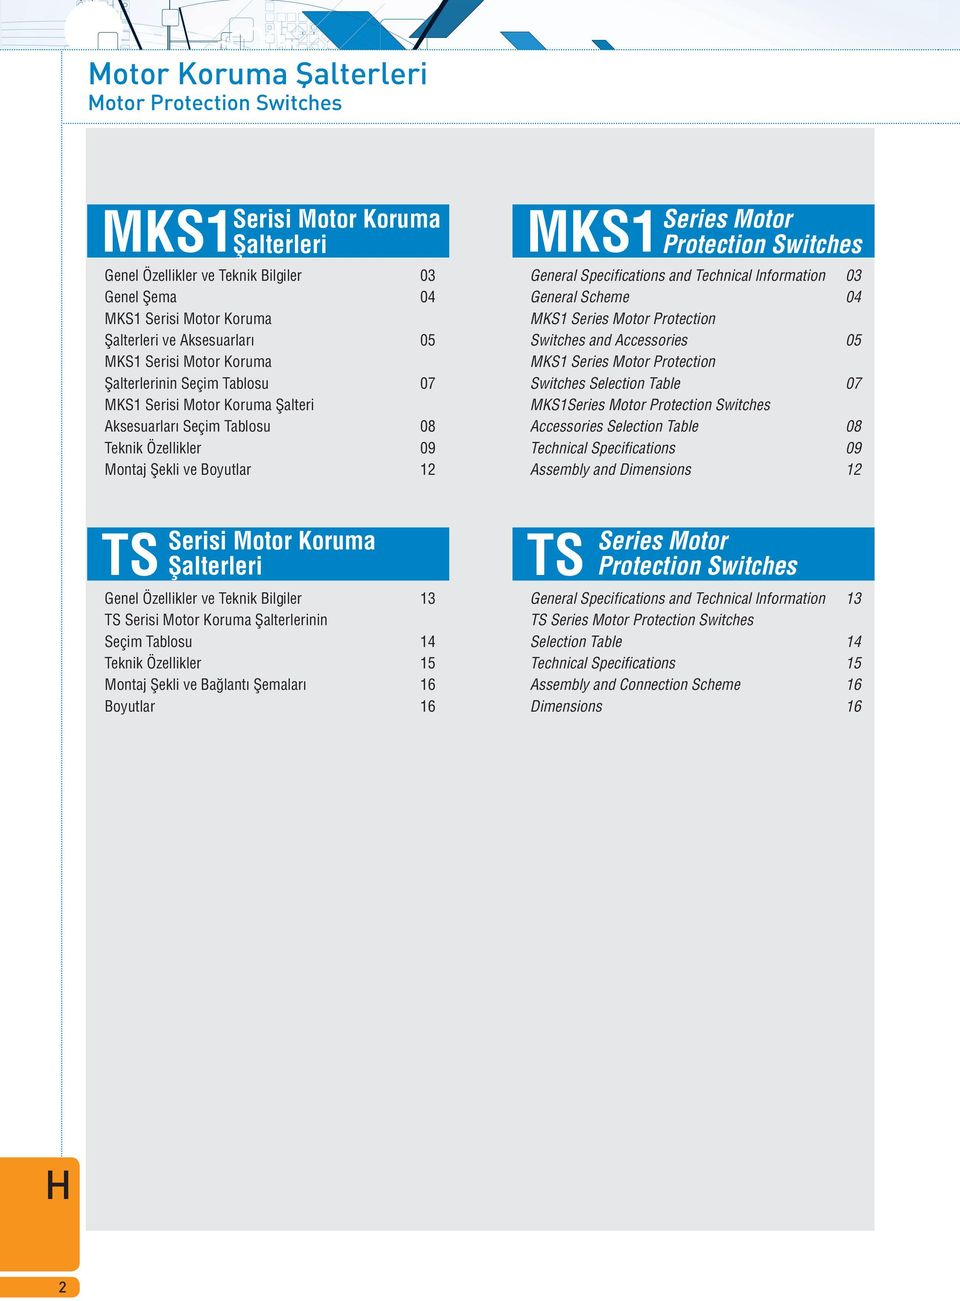 Specifications and Technical lnformation 03 General Scheme 04 MKS1 Series Motor Protection Switches and Accessories 05 MKS1 Series Motor Protection Switches Selection Table 07 MKS1Series Accessories